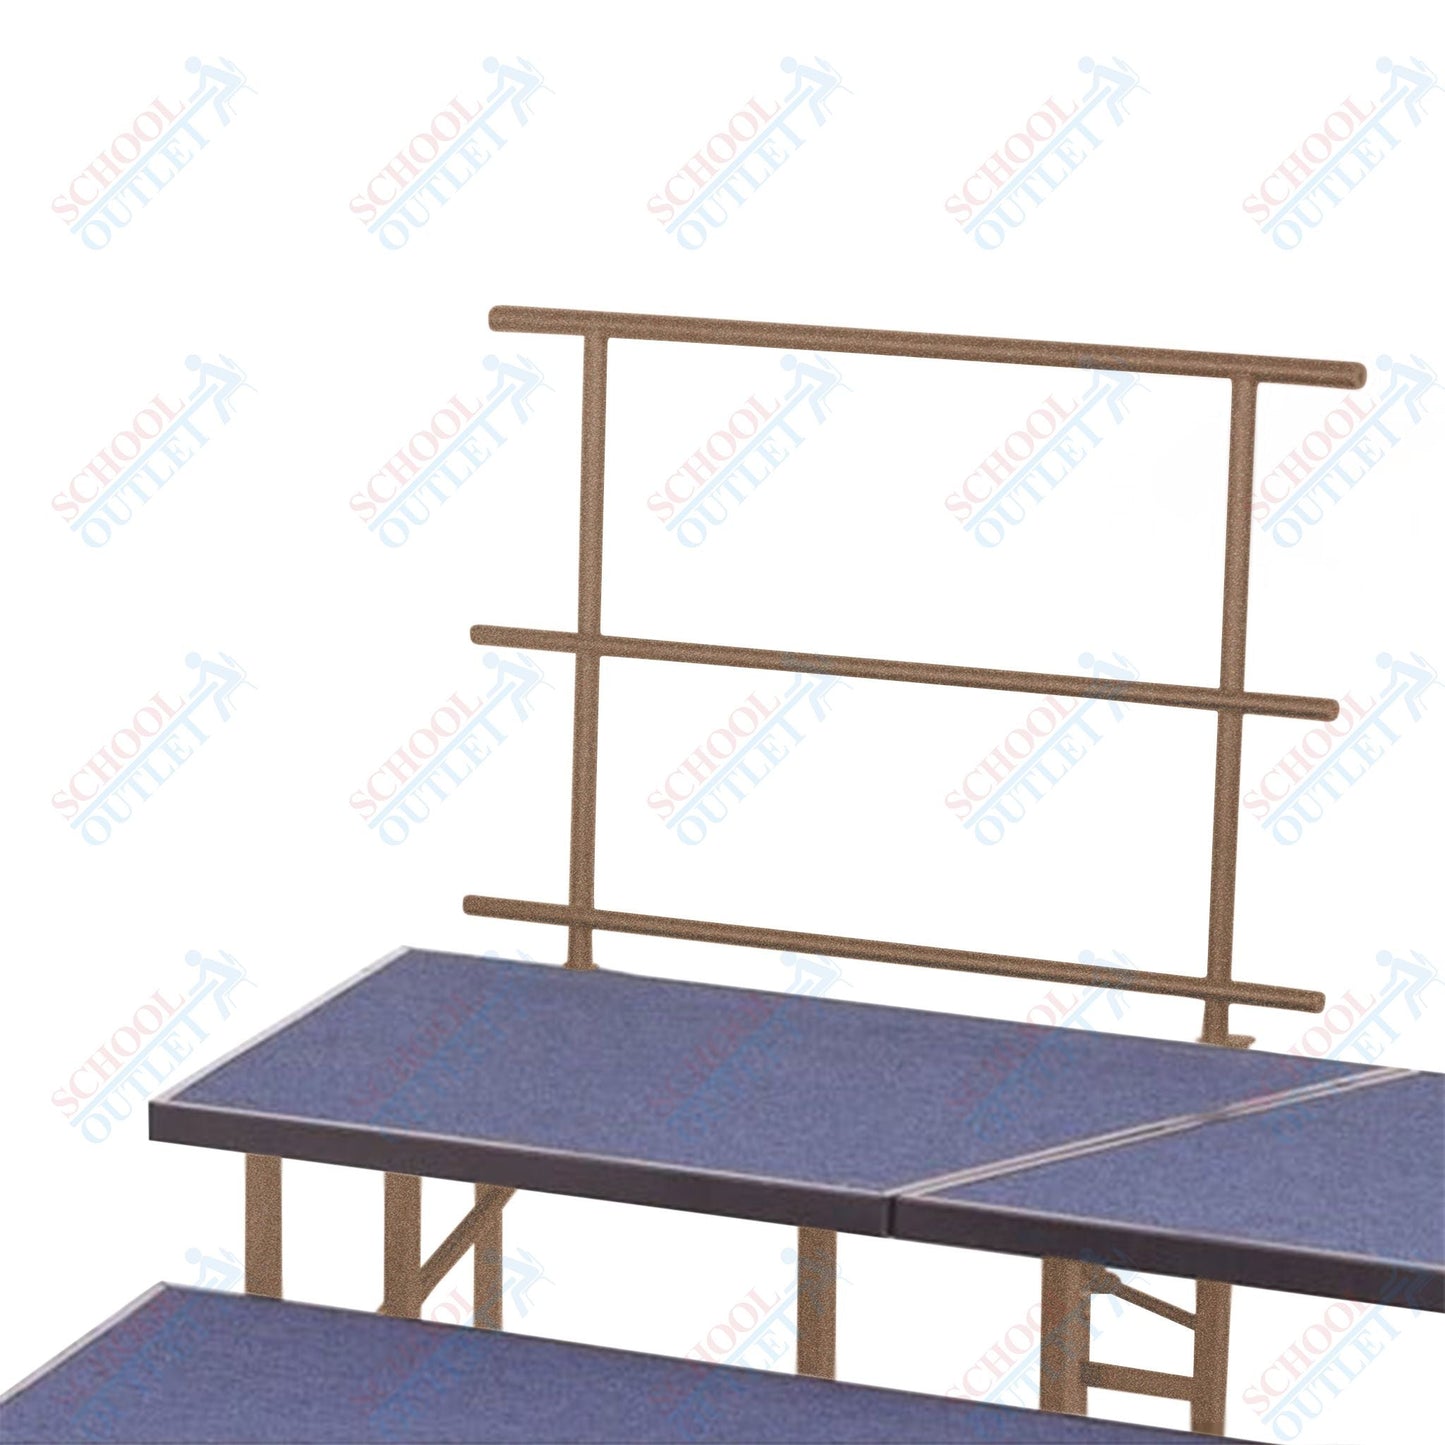 AmTab Stage and Riser Guard Rail - Chair Stop - 25"W x 31" H (AmTab AMT-STGR25) - SchoolOutlet